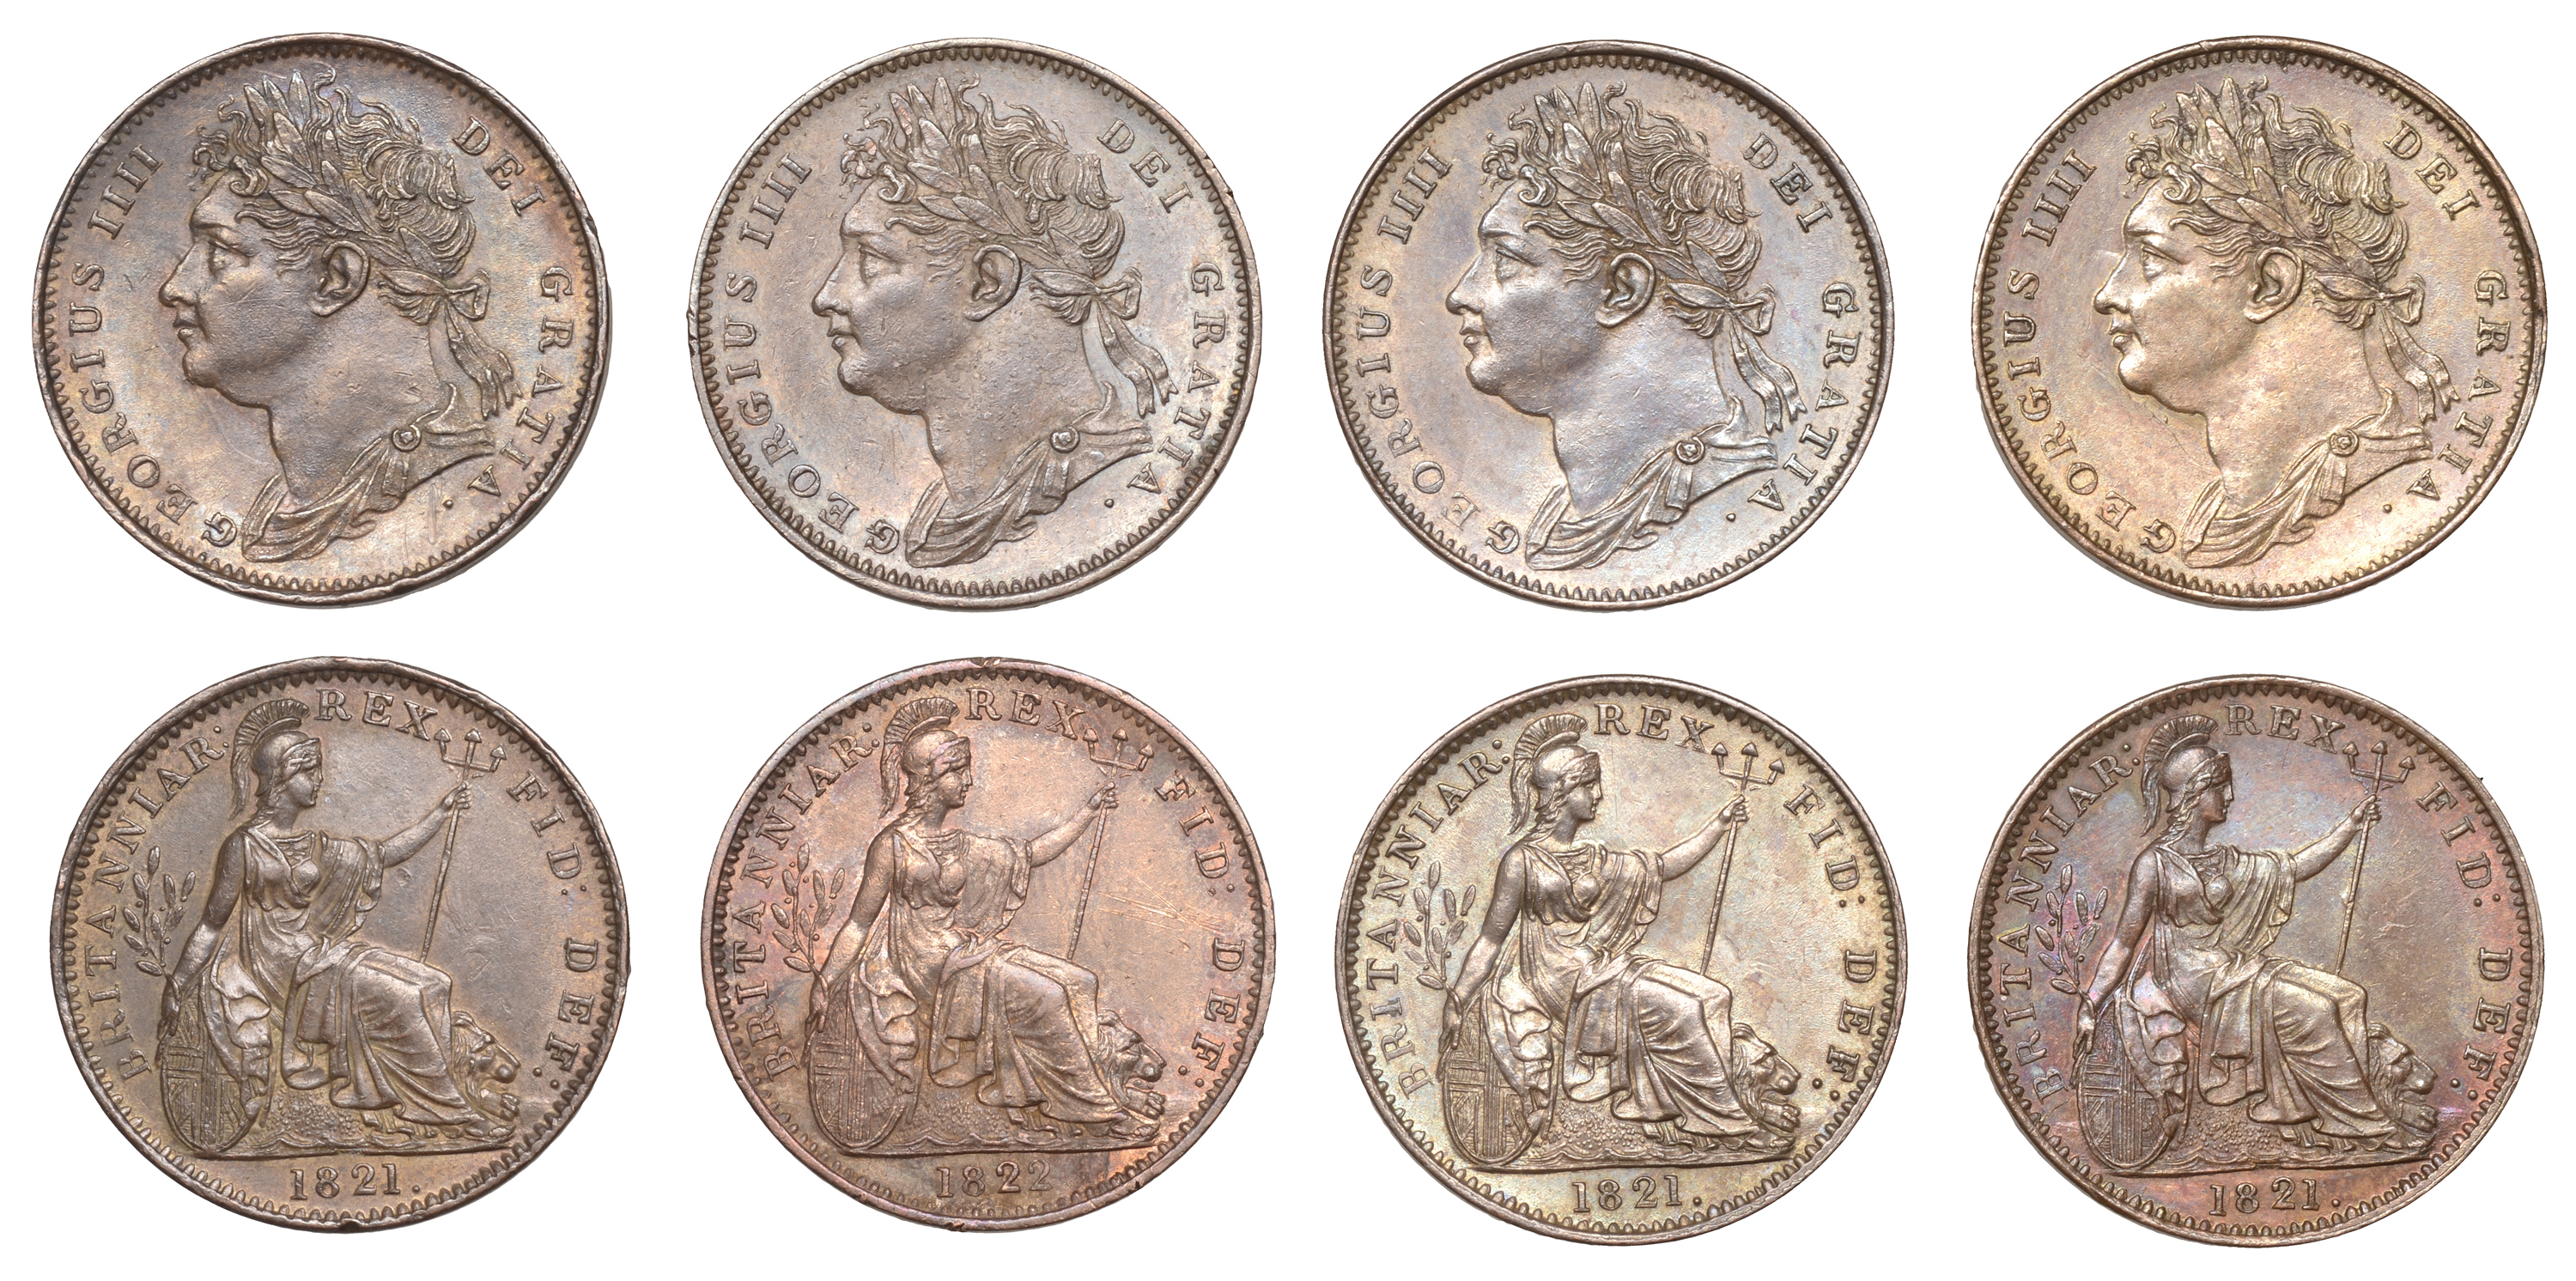 George IV, Farthings (4), 1821 (3), 1822 (S 3822) [4]. Extremely fine or better Â£100-Â£120